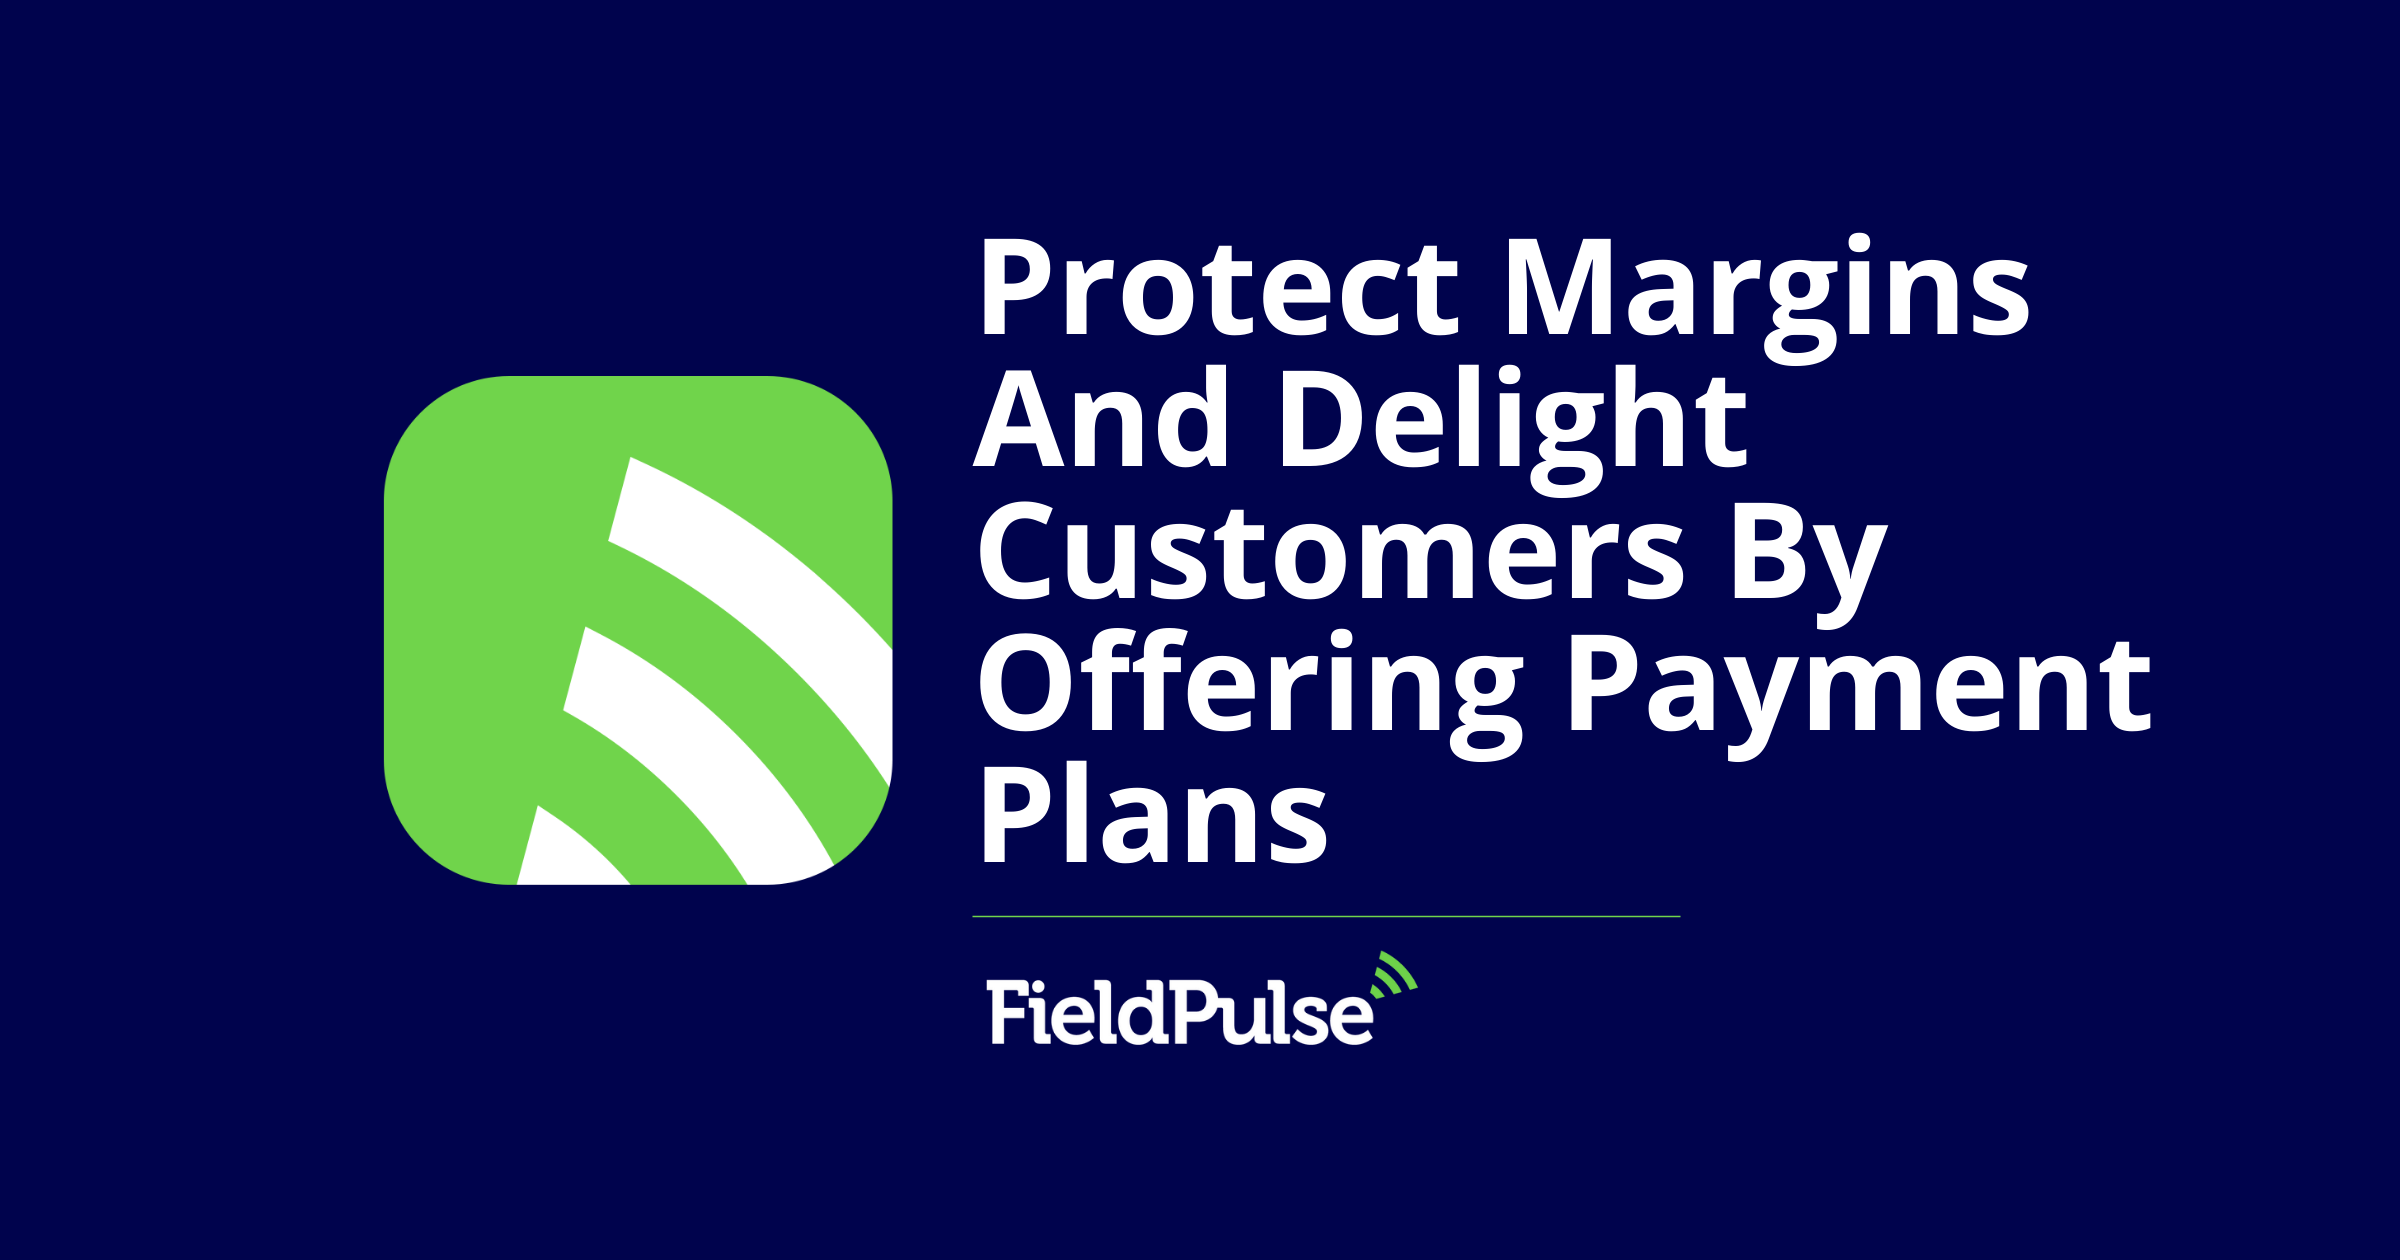 Protect Margins And Delight Customers By Offering Payment Plans